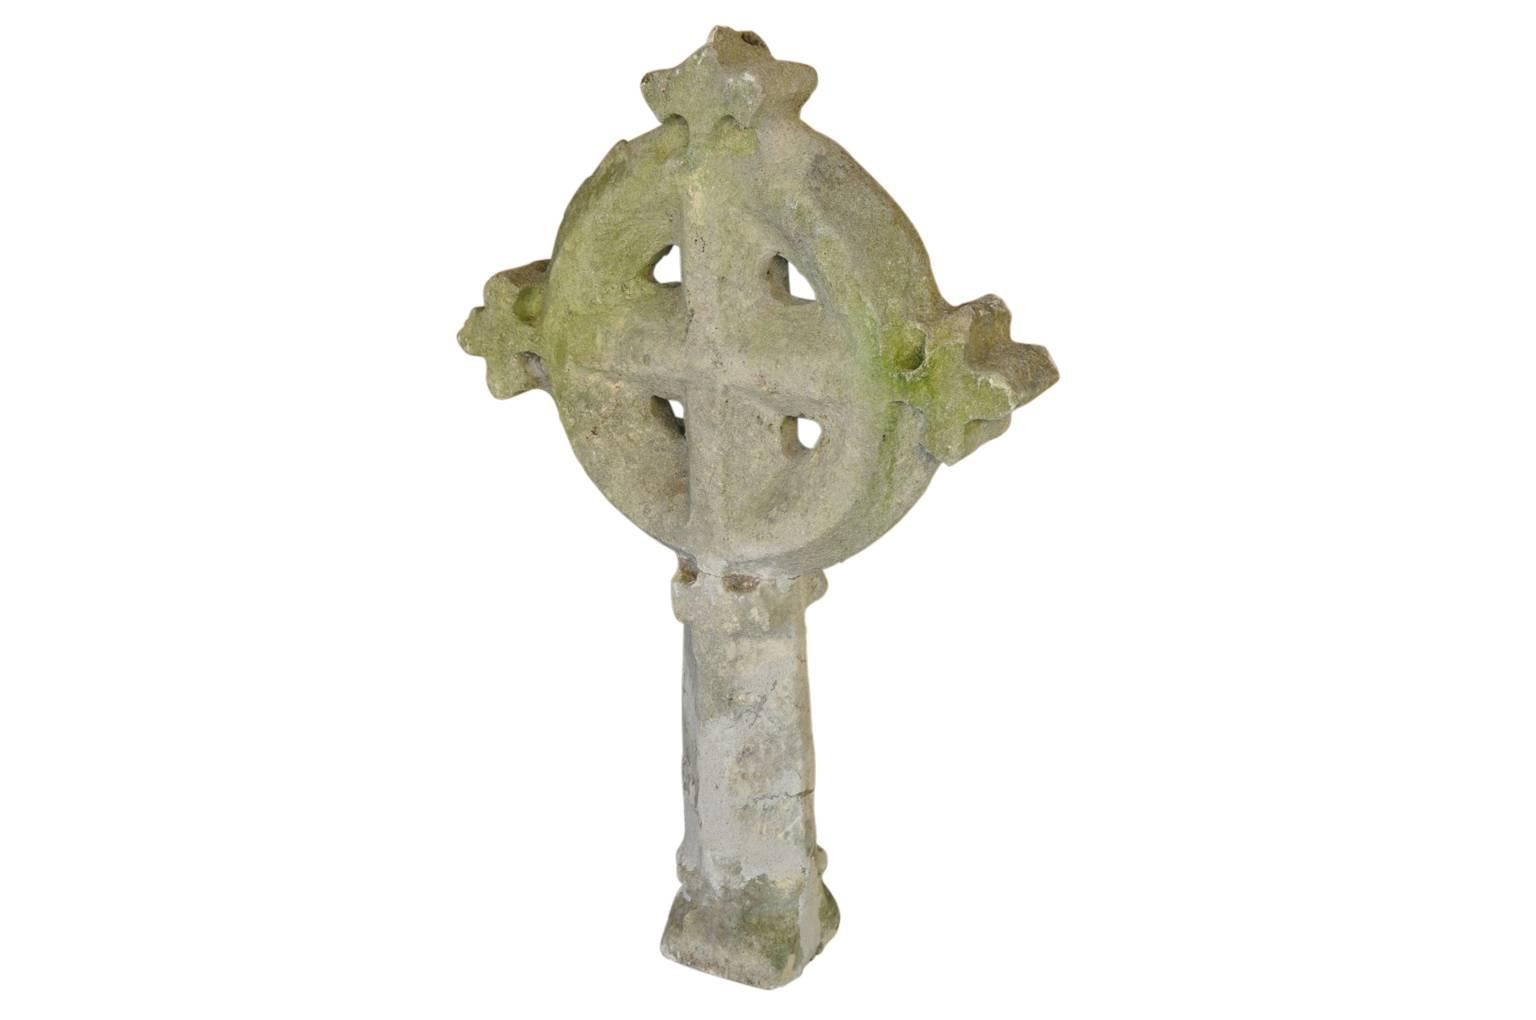 A stunning 17th century Celtic cross hand-carved from stone. This spectacular cross once graced the roof above the entrance to a chapel in Kent Sussex. A wonderful piece to decorate any interior or garden.